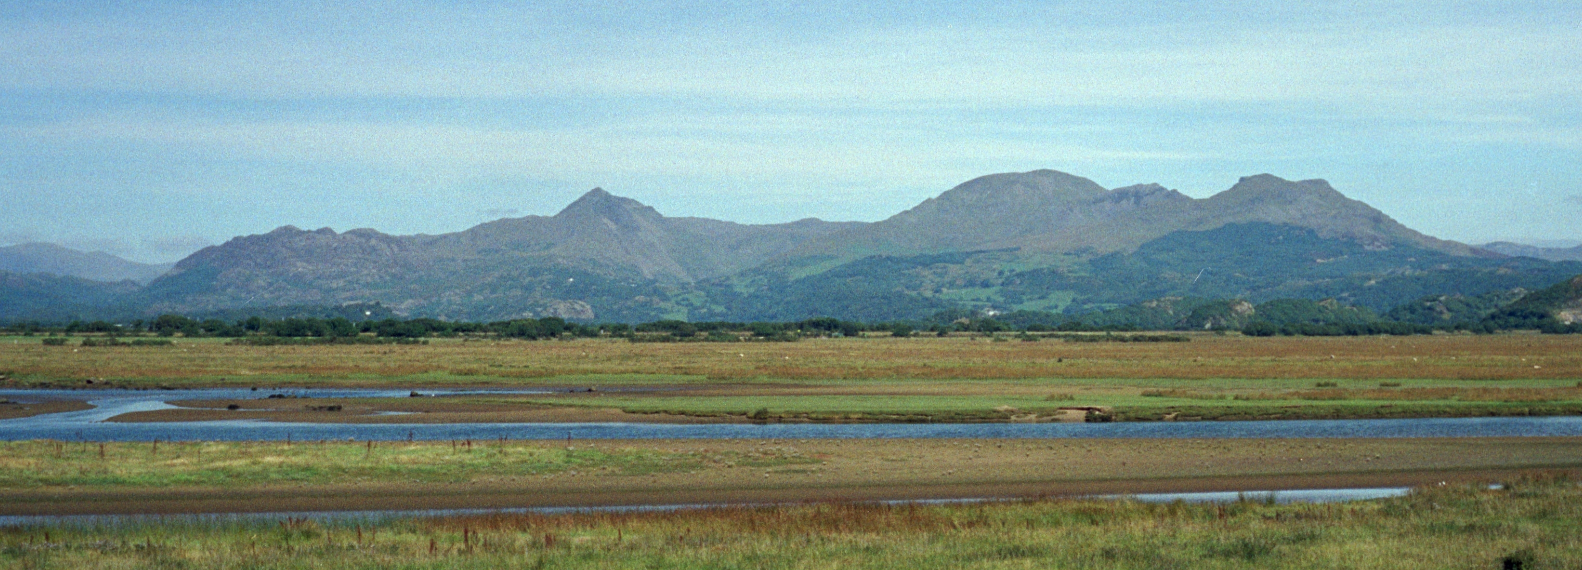 A view of Traeth Mawr, Wales, from the Cob, looking towards the Moelwyn mountain range